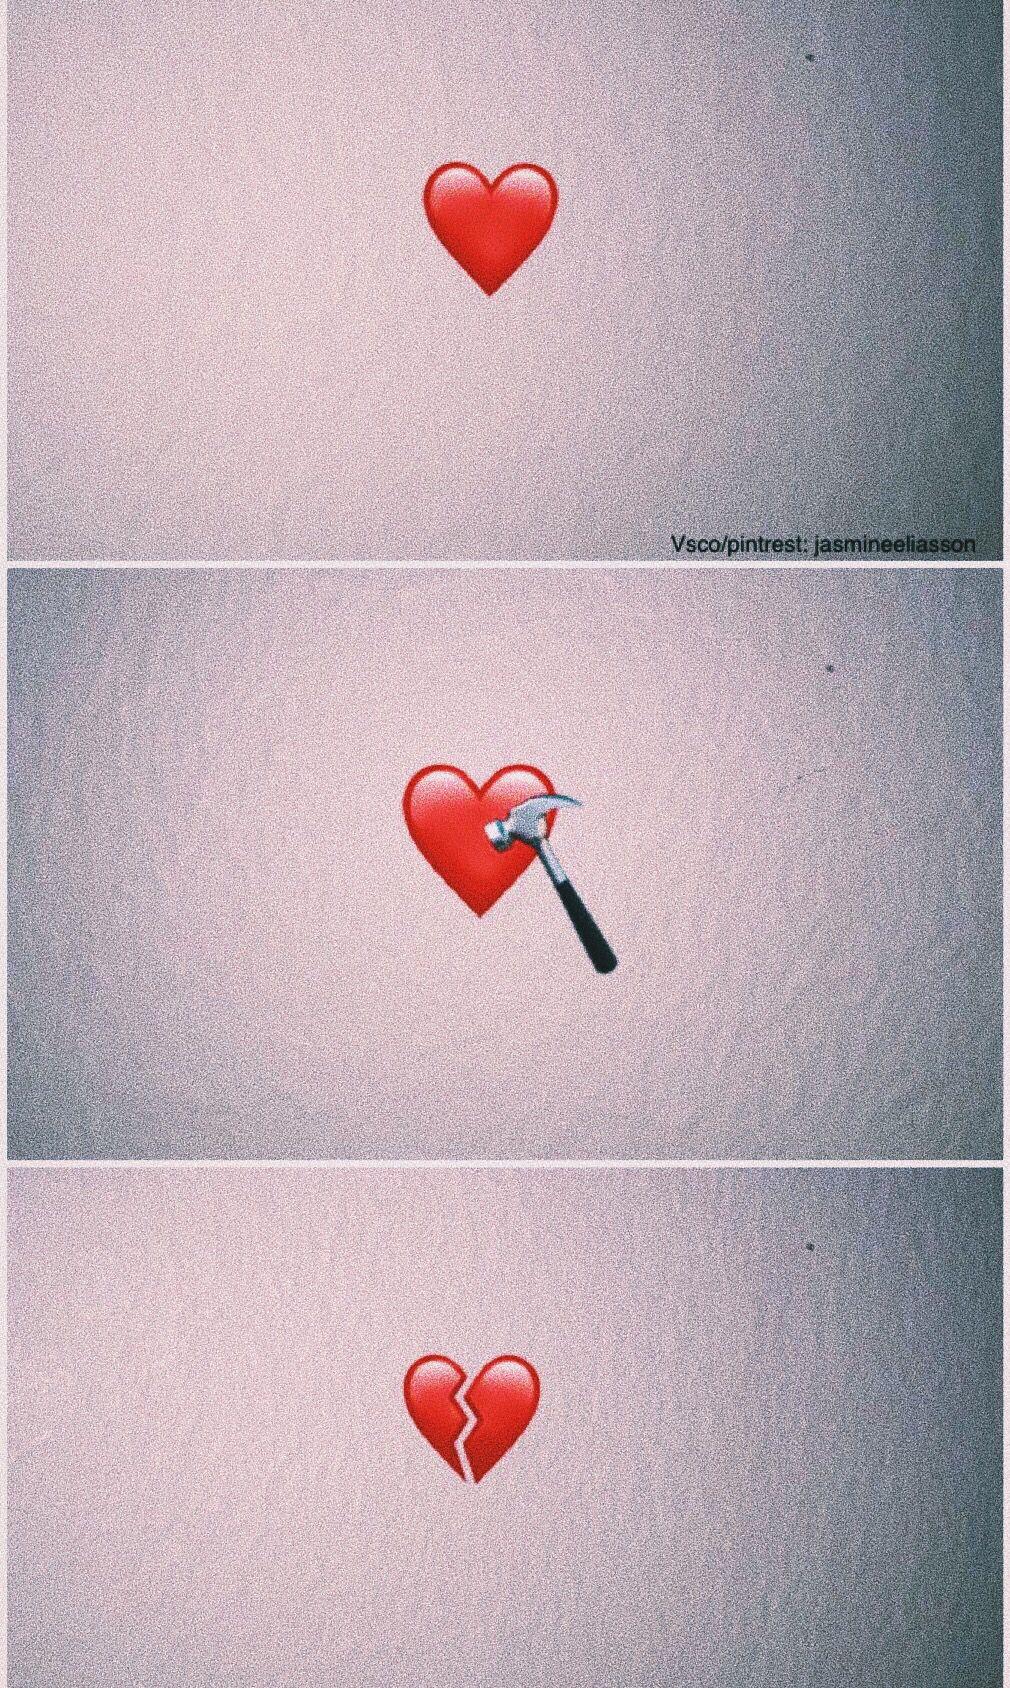 Heart Wallpaper Aesthetic : Pin by Zoe Lister on Aesthetic Wallpapers